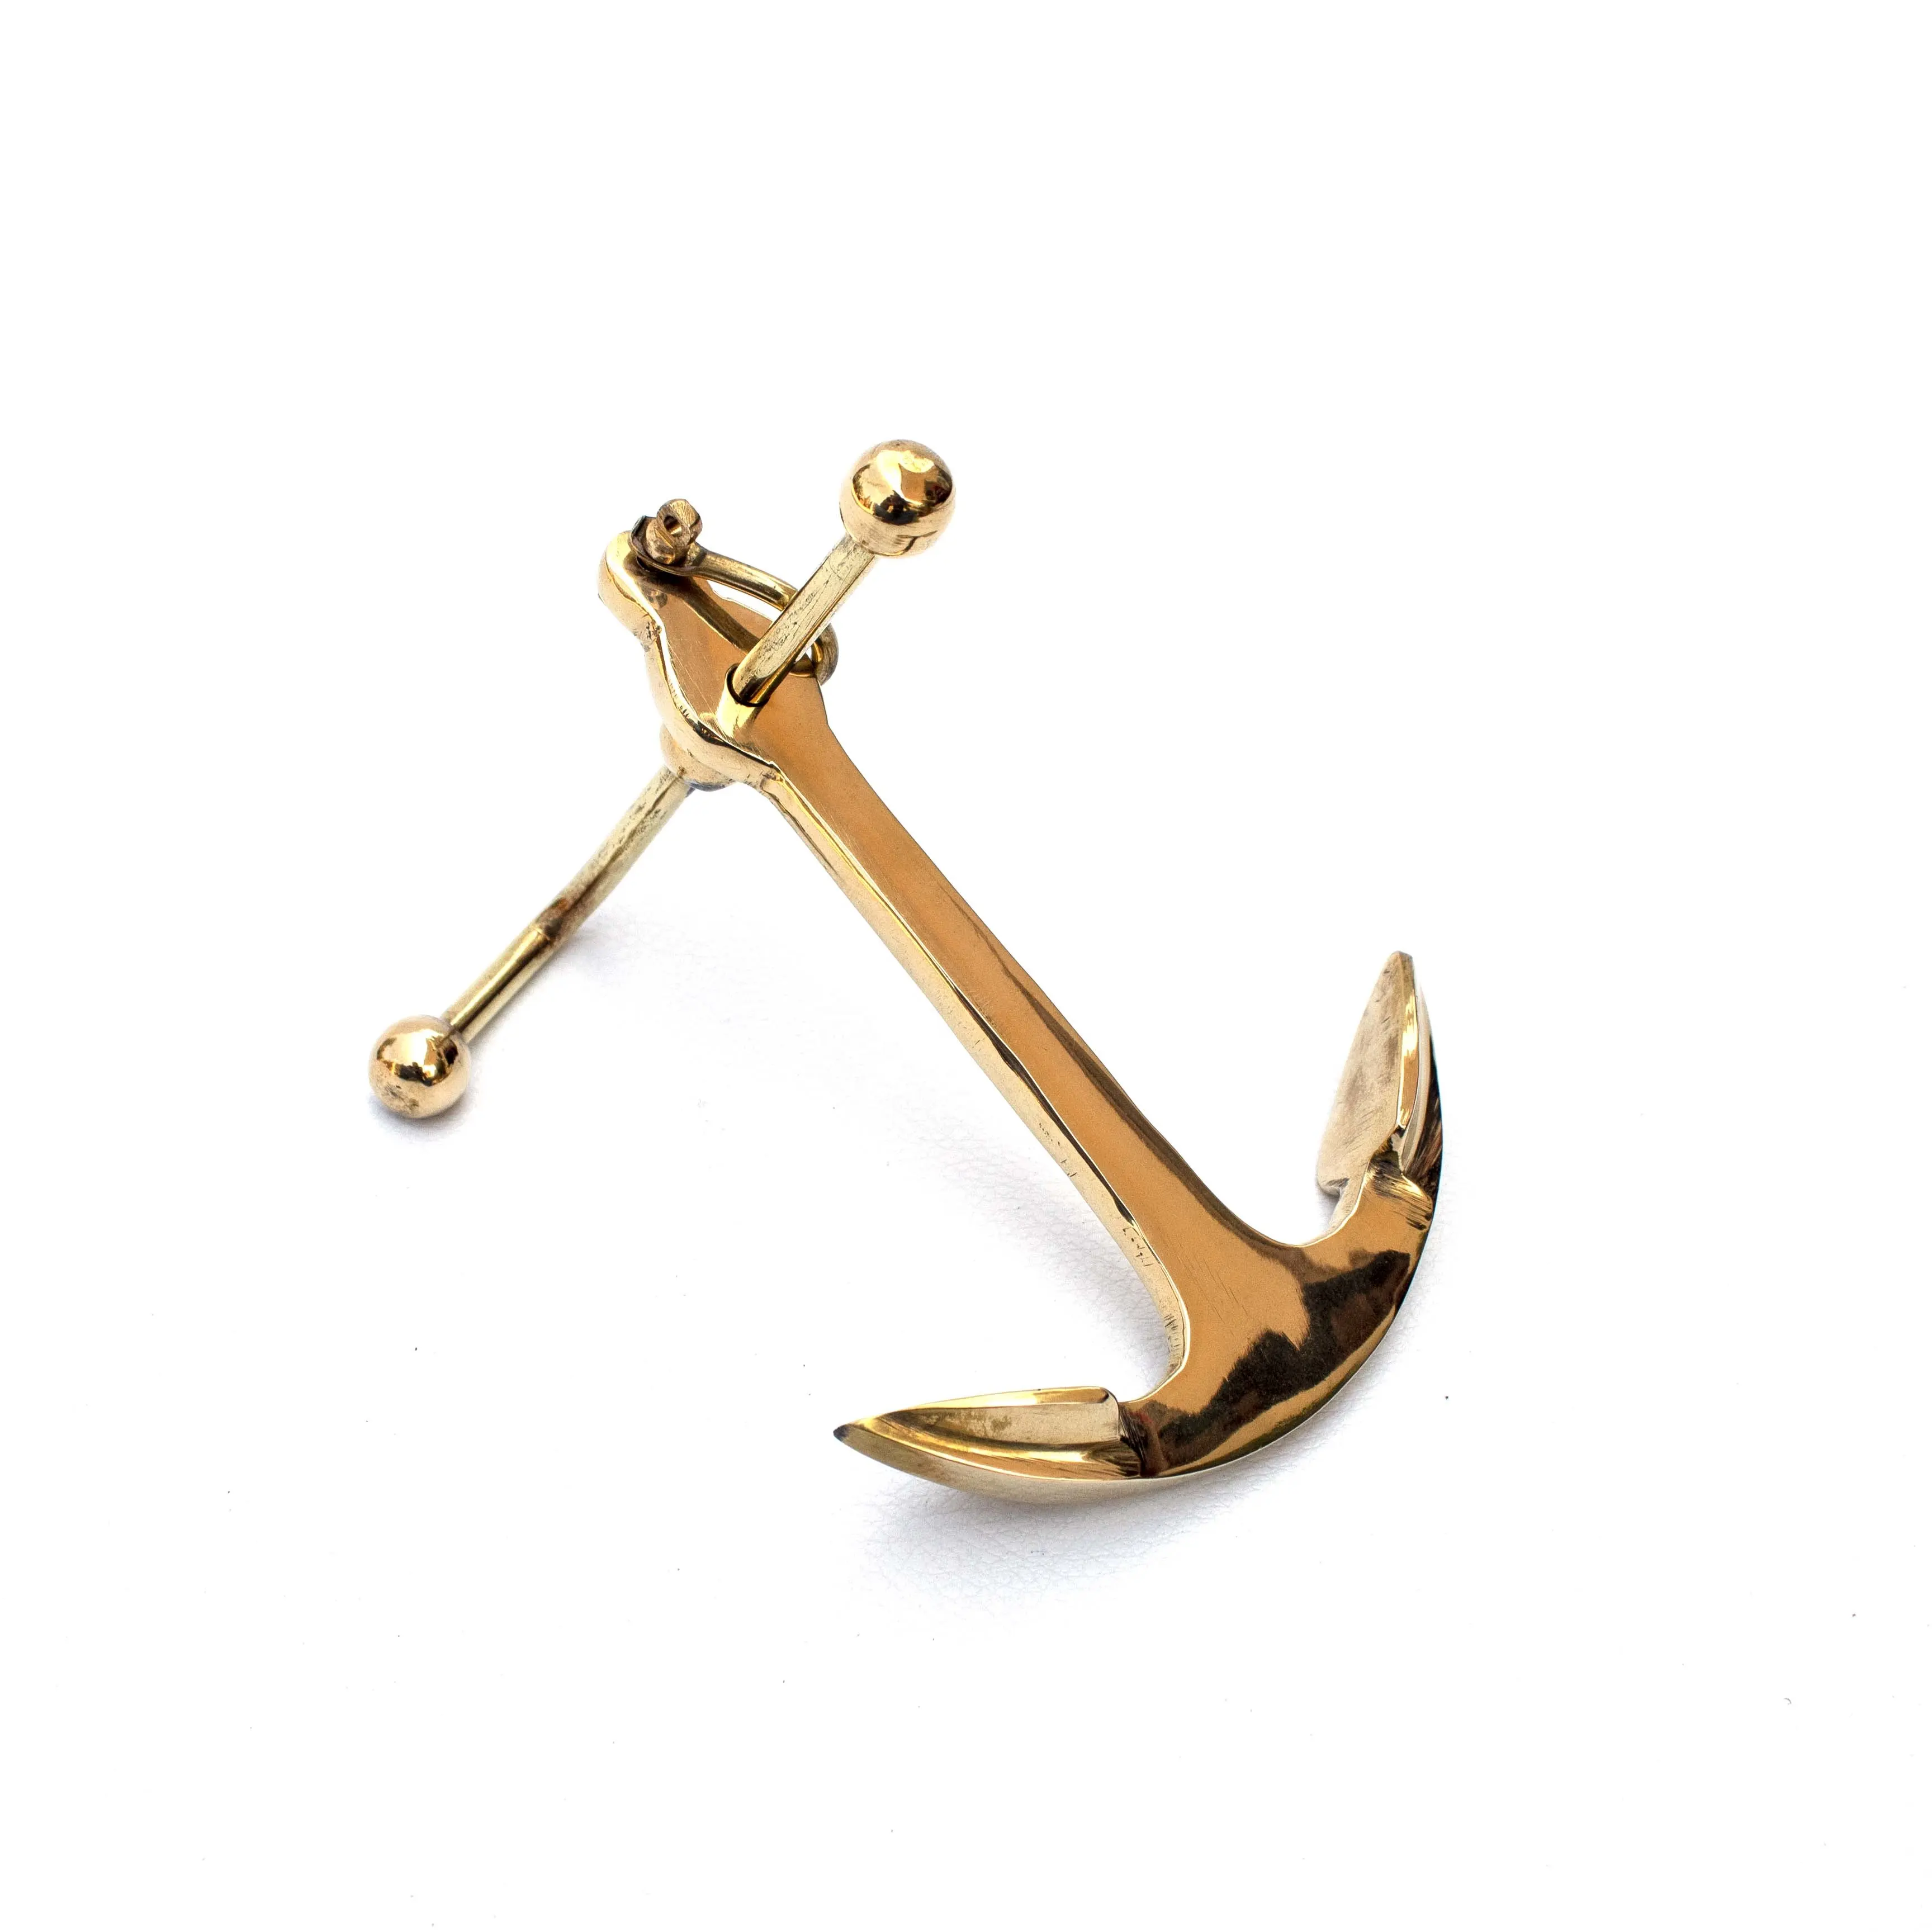 Hot Selling Nautical Marine Brass Finish 5 Inch Navy Anchor with Pin Decorative Model Boat Ship